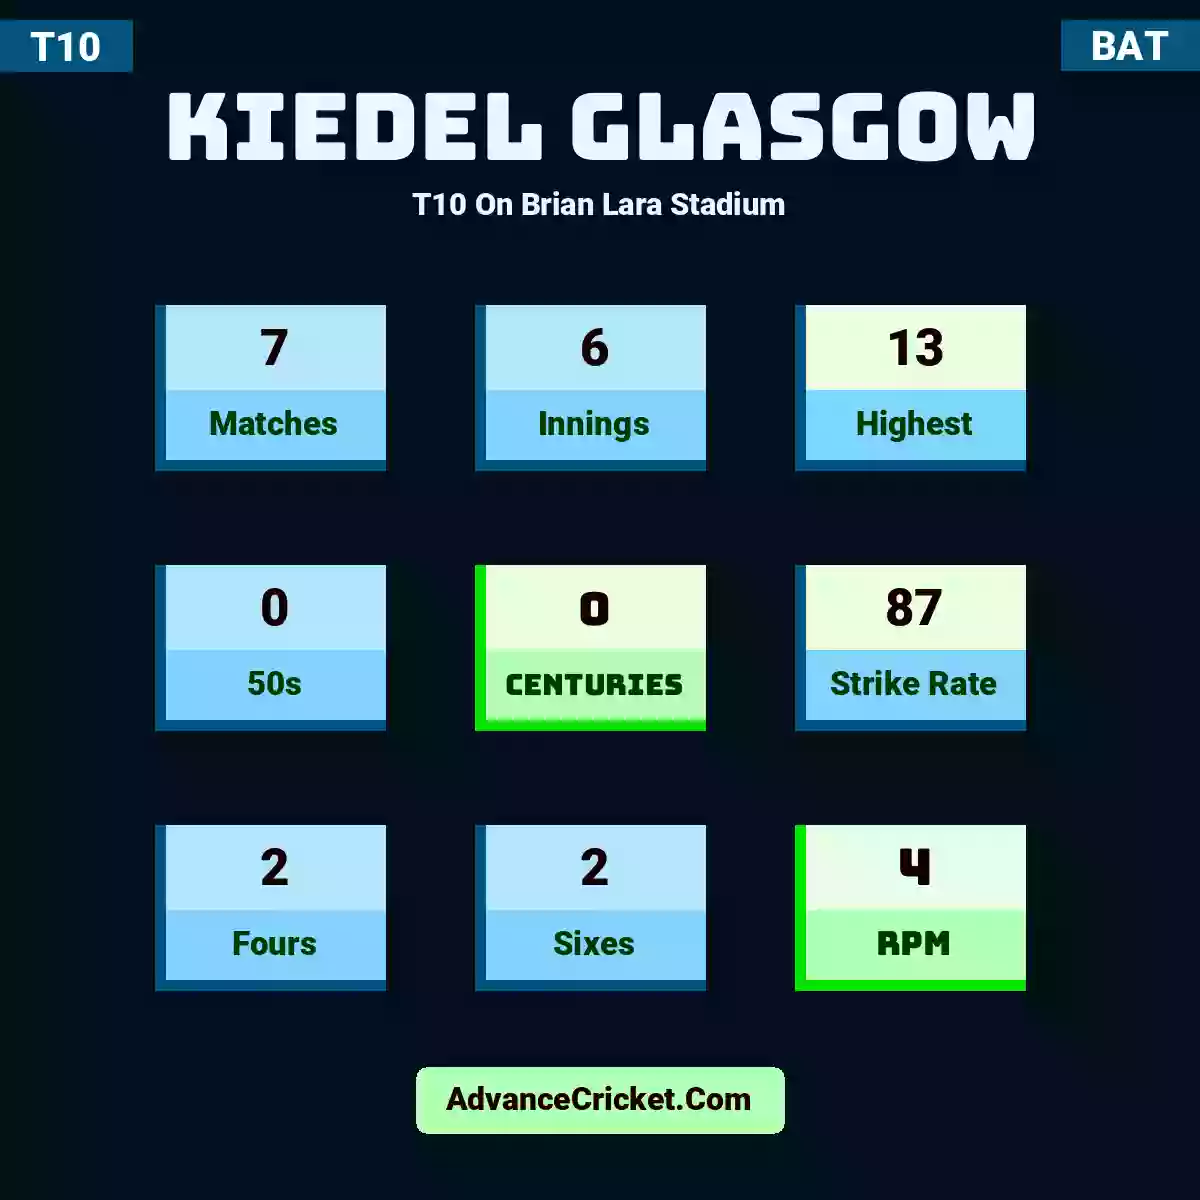 Kiedel Glasgow T10  On Brian Lara Stadium, Kiedel Glasgow played 7 matches, scored 13 runs as highest, 0 half-centuries, and 0 centuries, with a strike rate of 87. k.glasgow hit 2 fours and 2 sixes, with an RPM of 4.